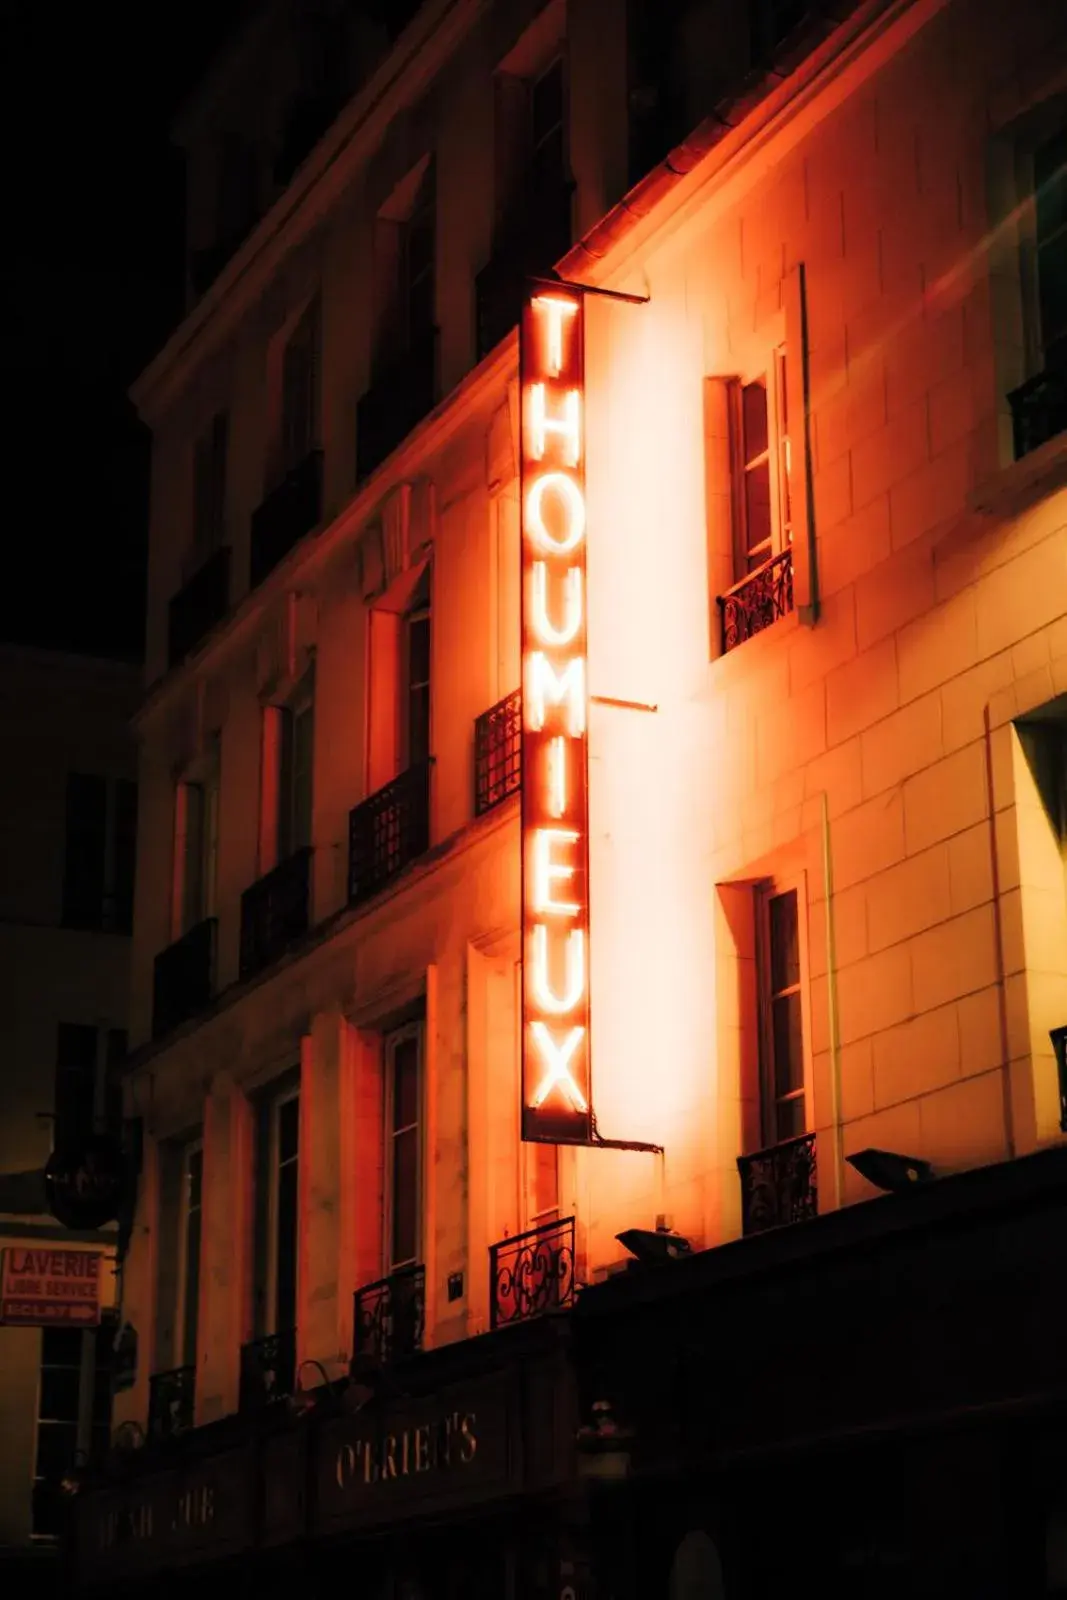 Property Building in Hotel Thoumieux